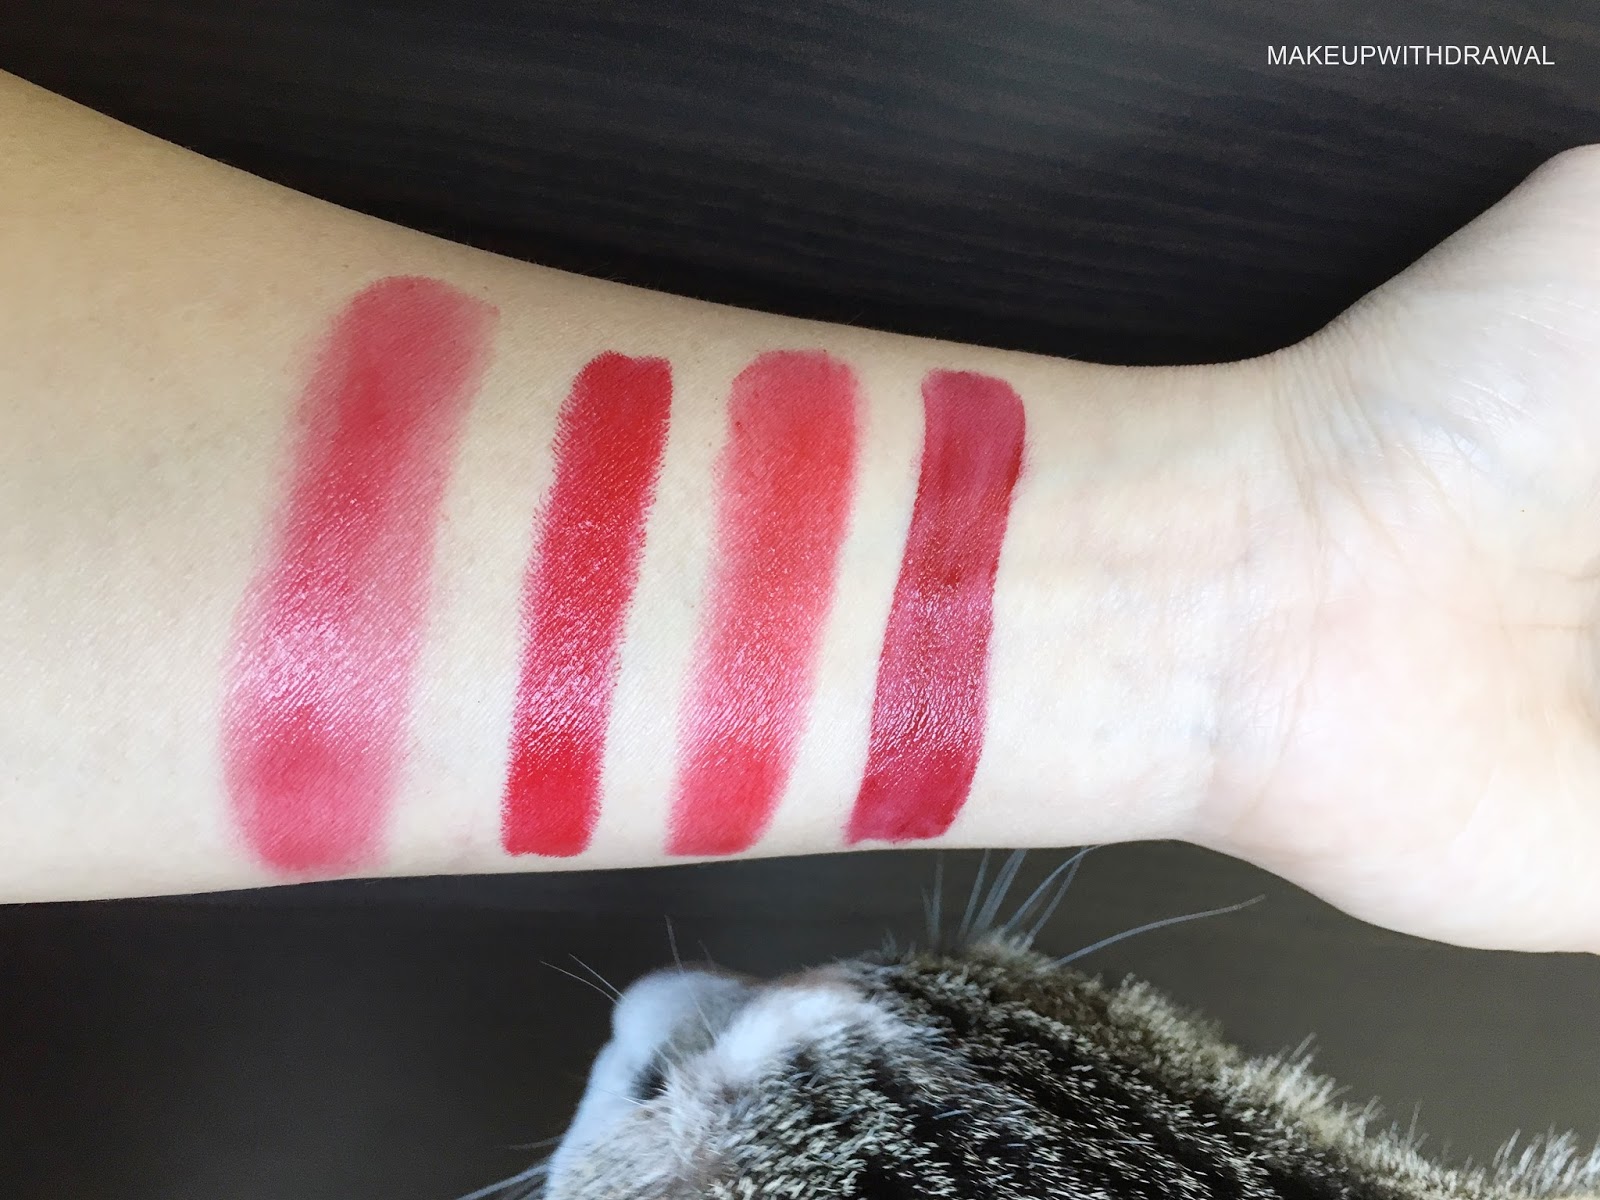 givenchy rouge interdit marbled lipstick